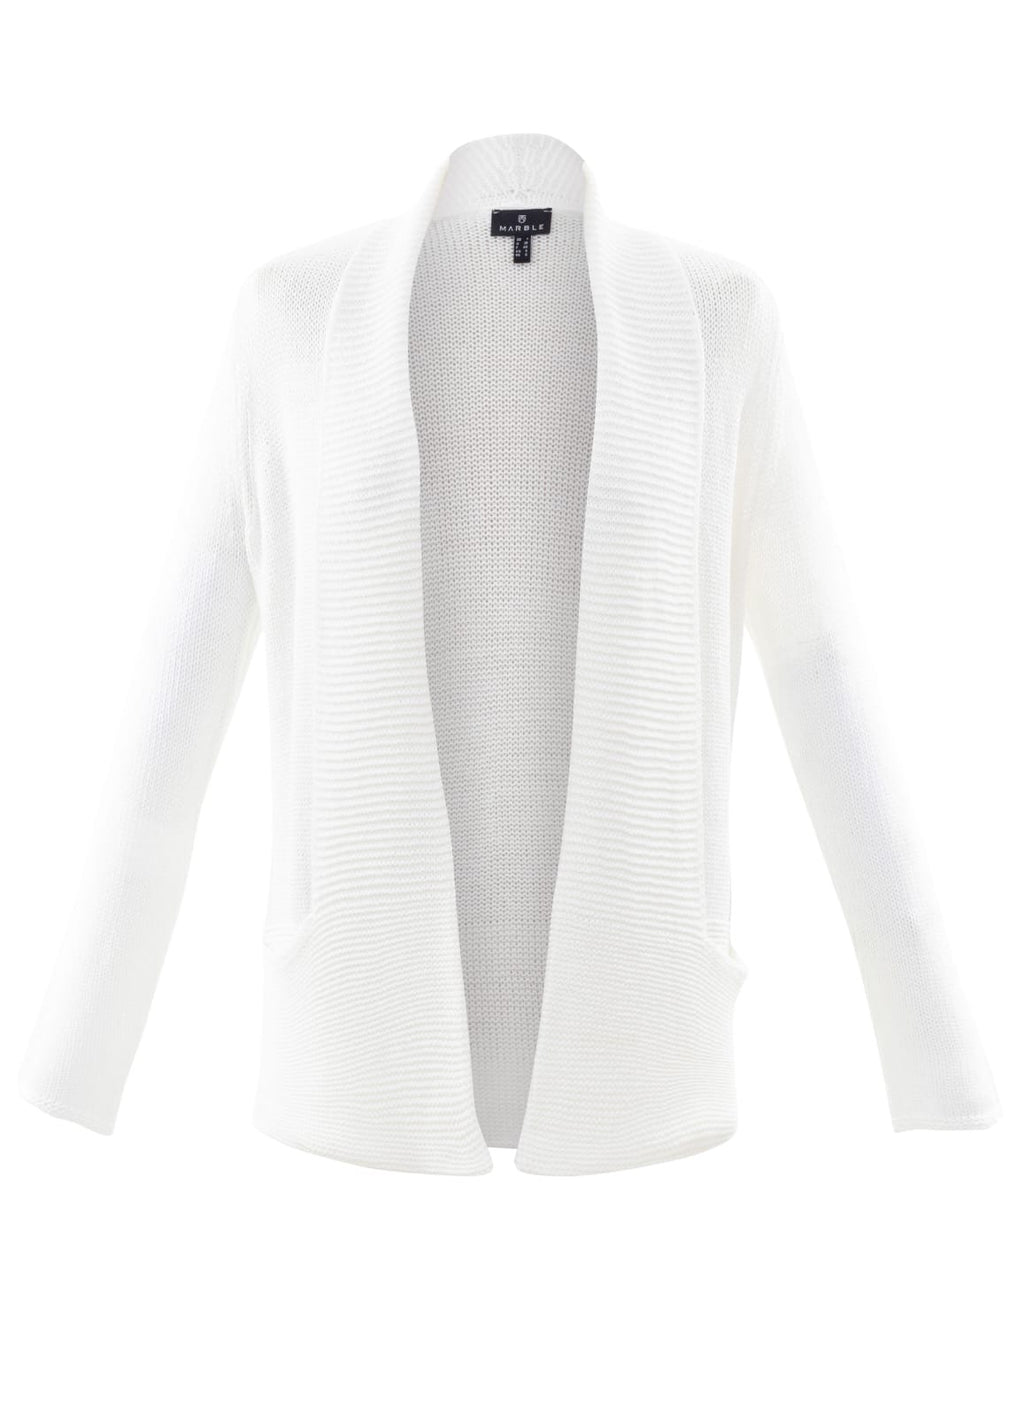 <p>Marble edge to edge waterfall knit cardigan in cream</p>
<p>Product code 6512-102</p>